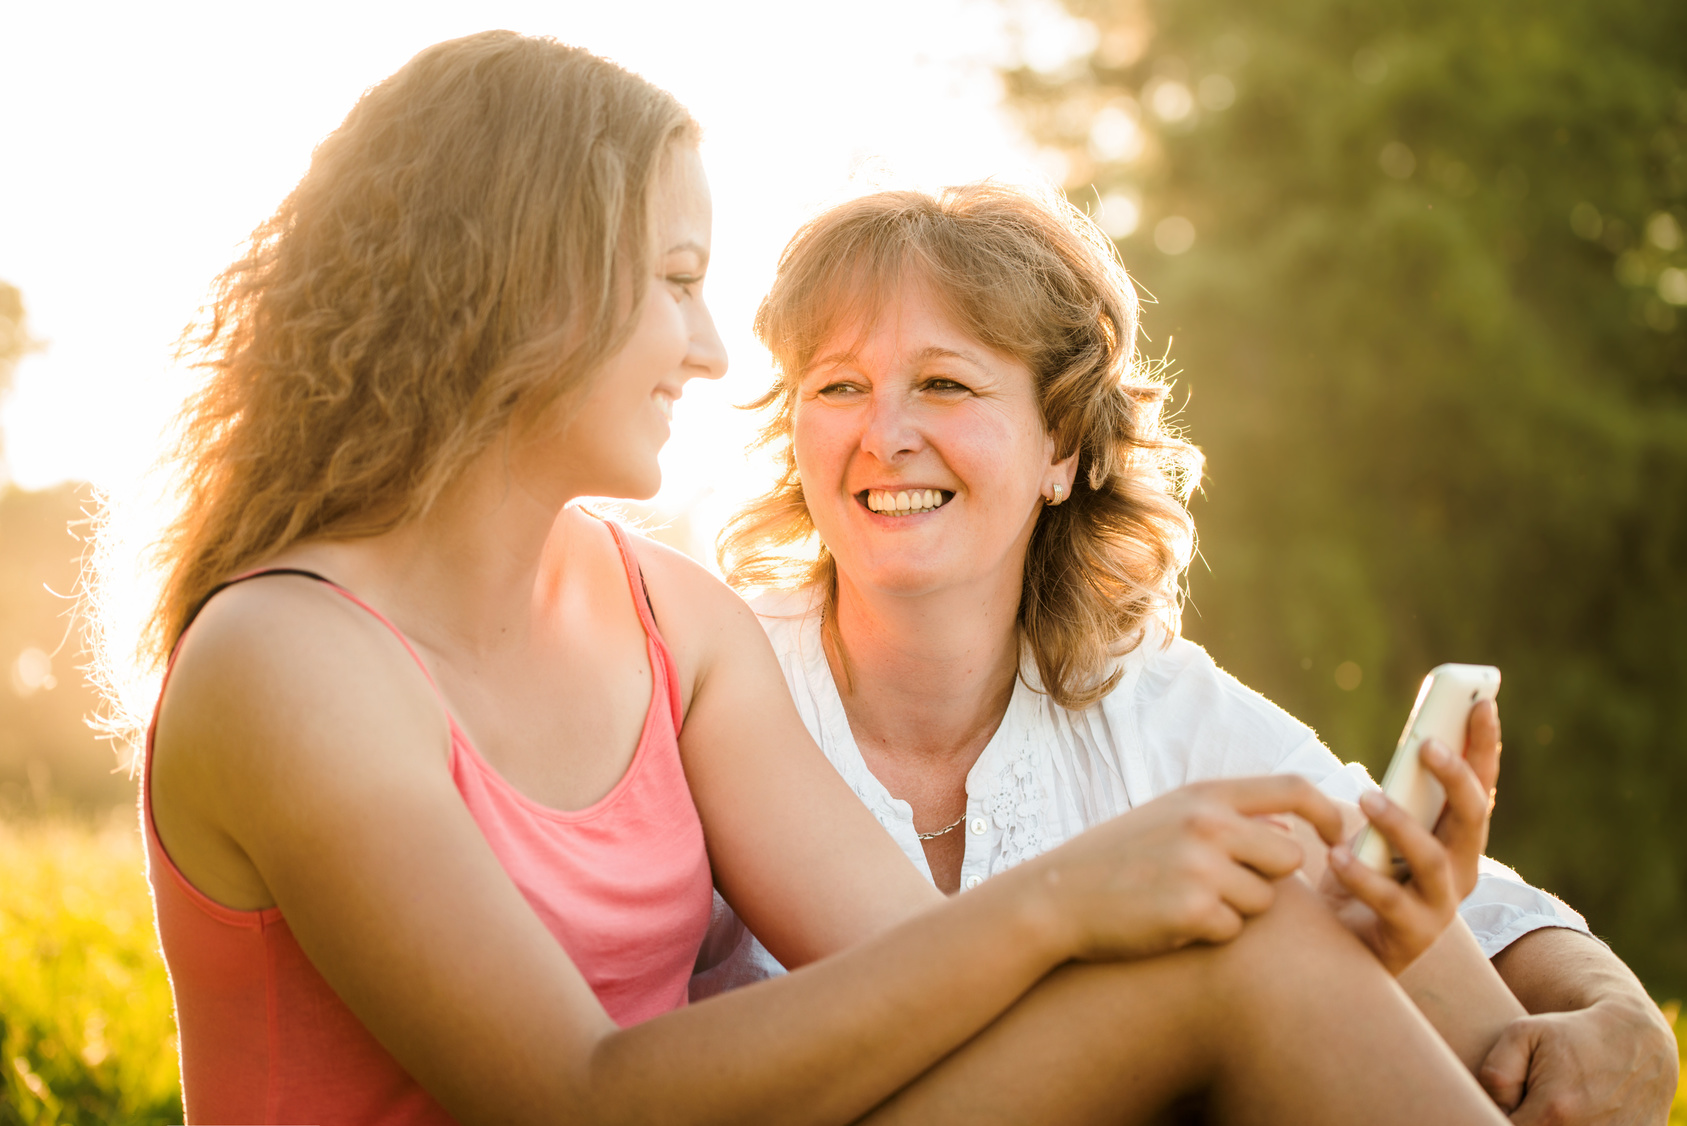 Happy moments together – mother and daughter